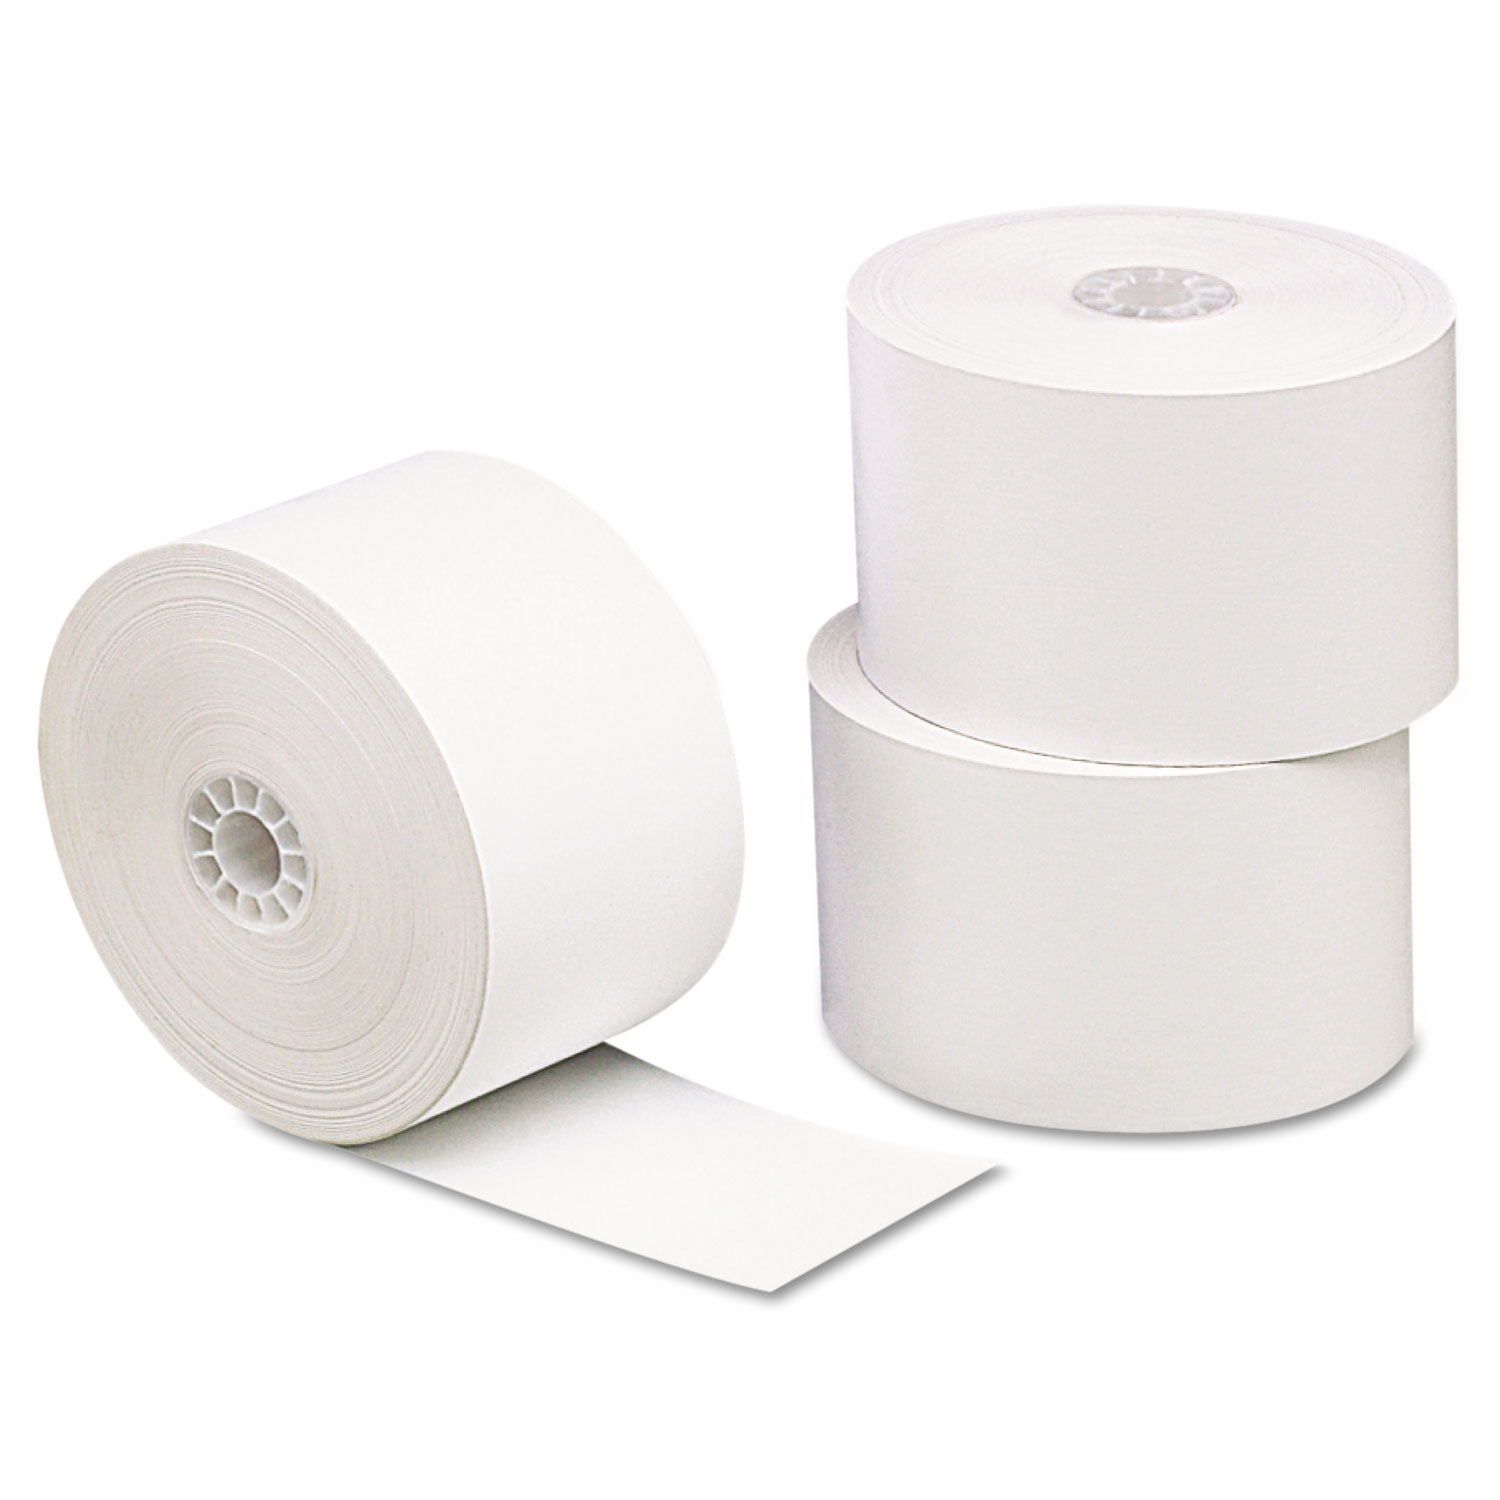 Direct Thermal Printing Paper Rolls, 3.13" x 230 ft, White, 10/Pack